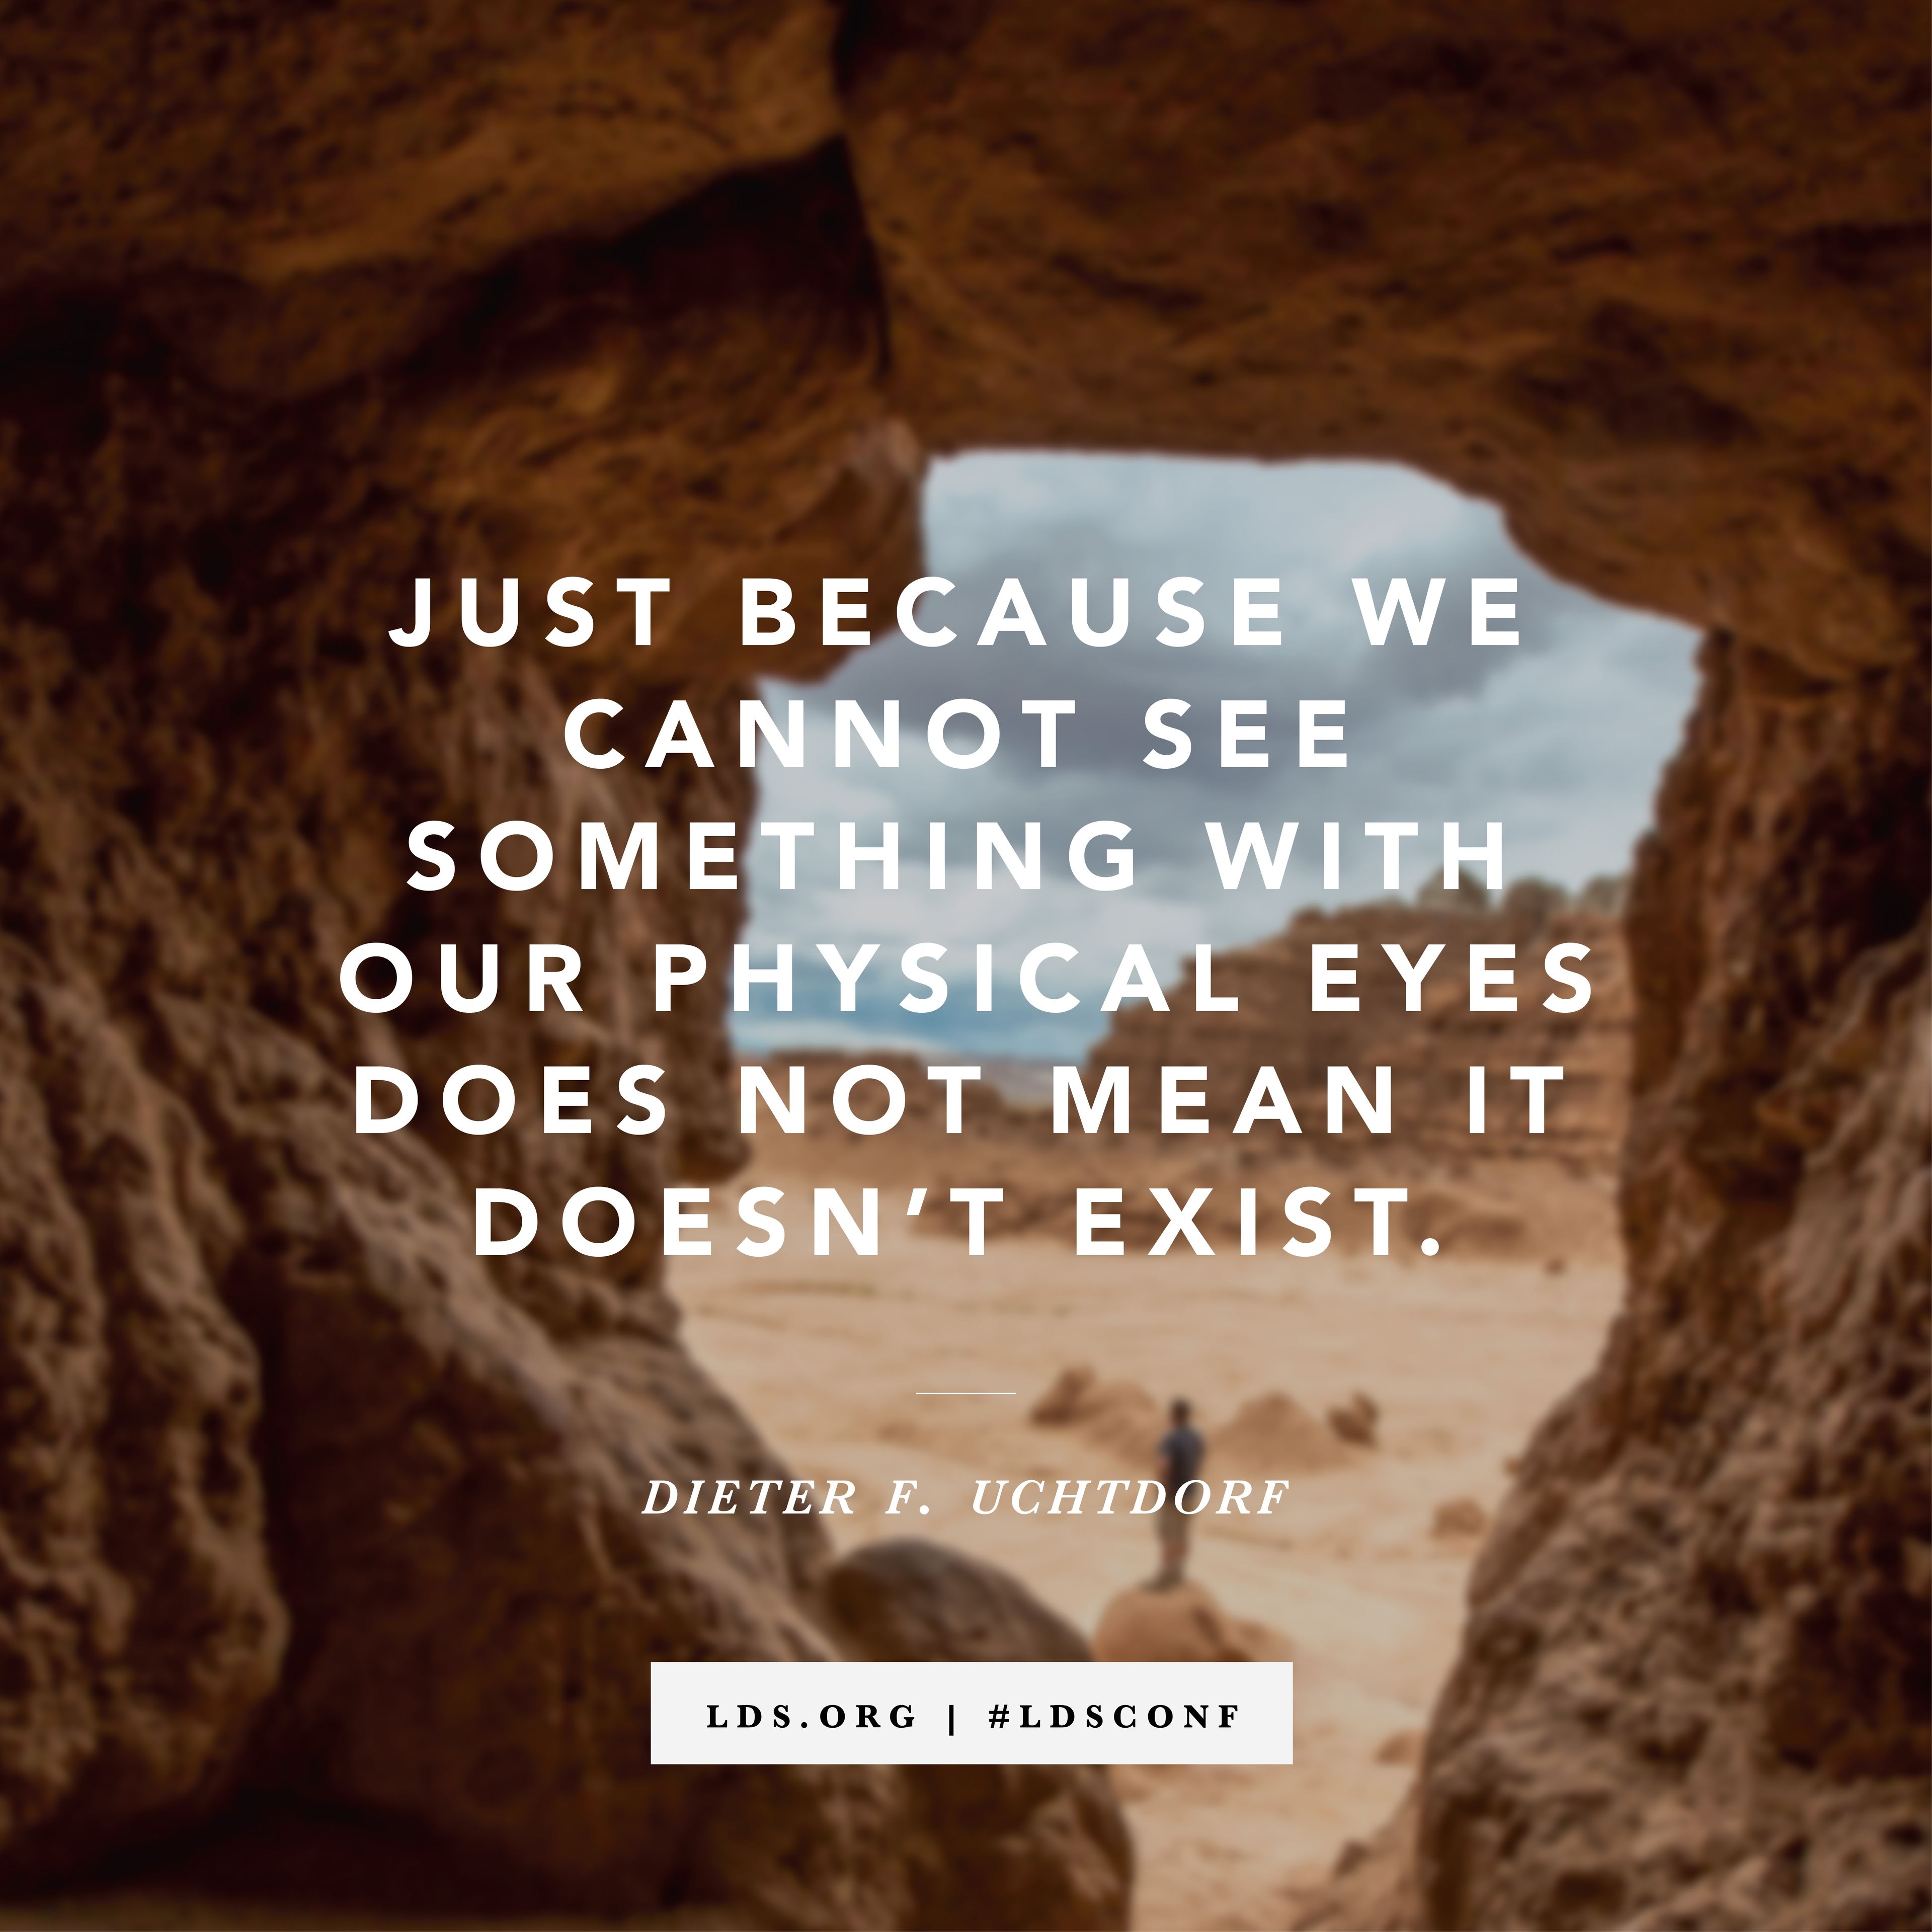 “Just because we cannot see something with our physical eyes does not mean it doesn’t exist.” —President Dieter F. Uchtdorf, “Be Not Afraid, Only Believe” © See Individual Images ipCode 1.